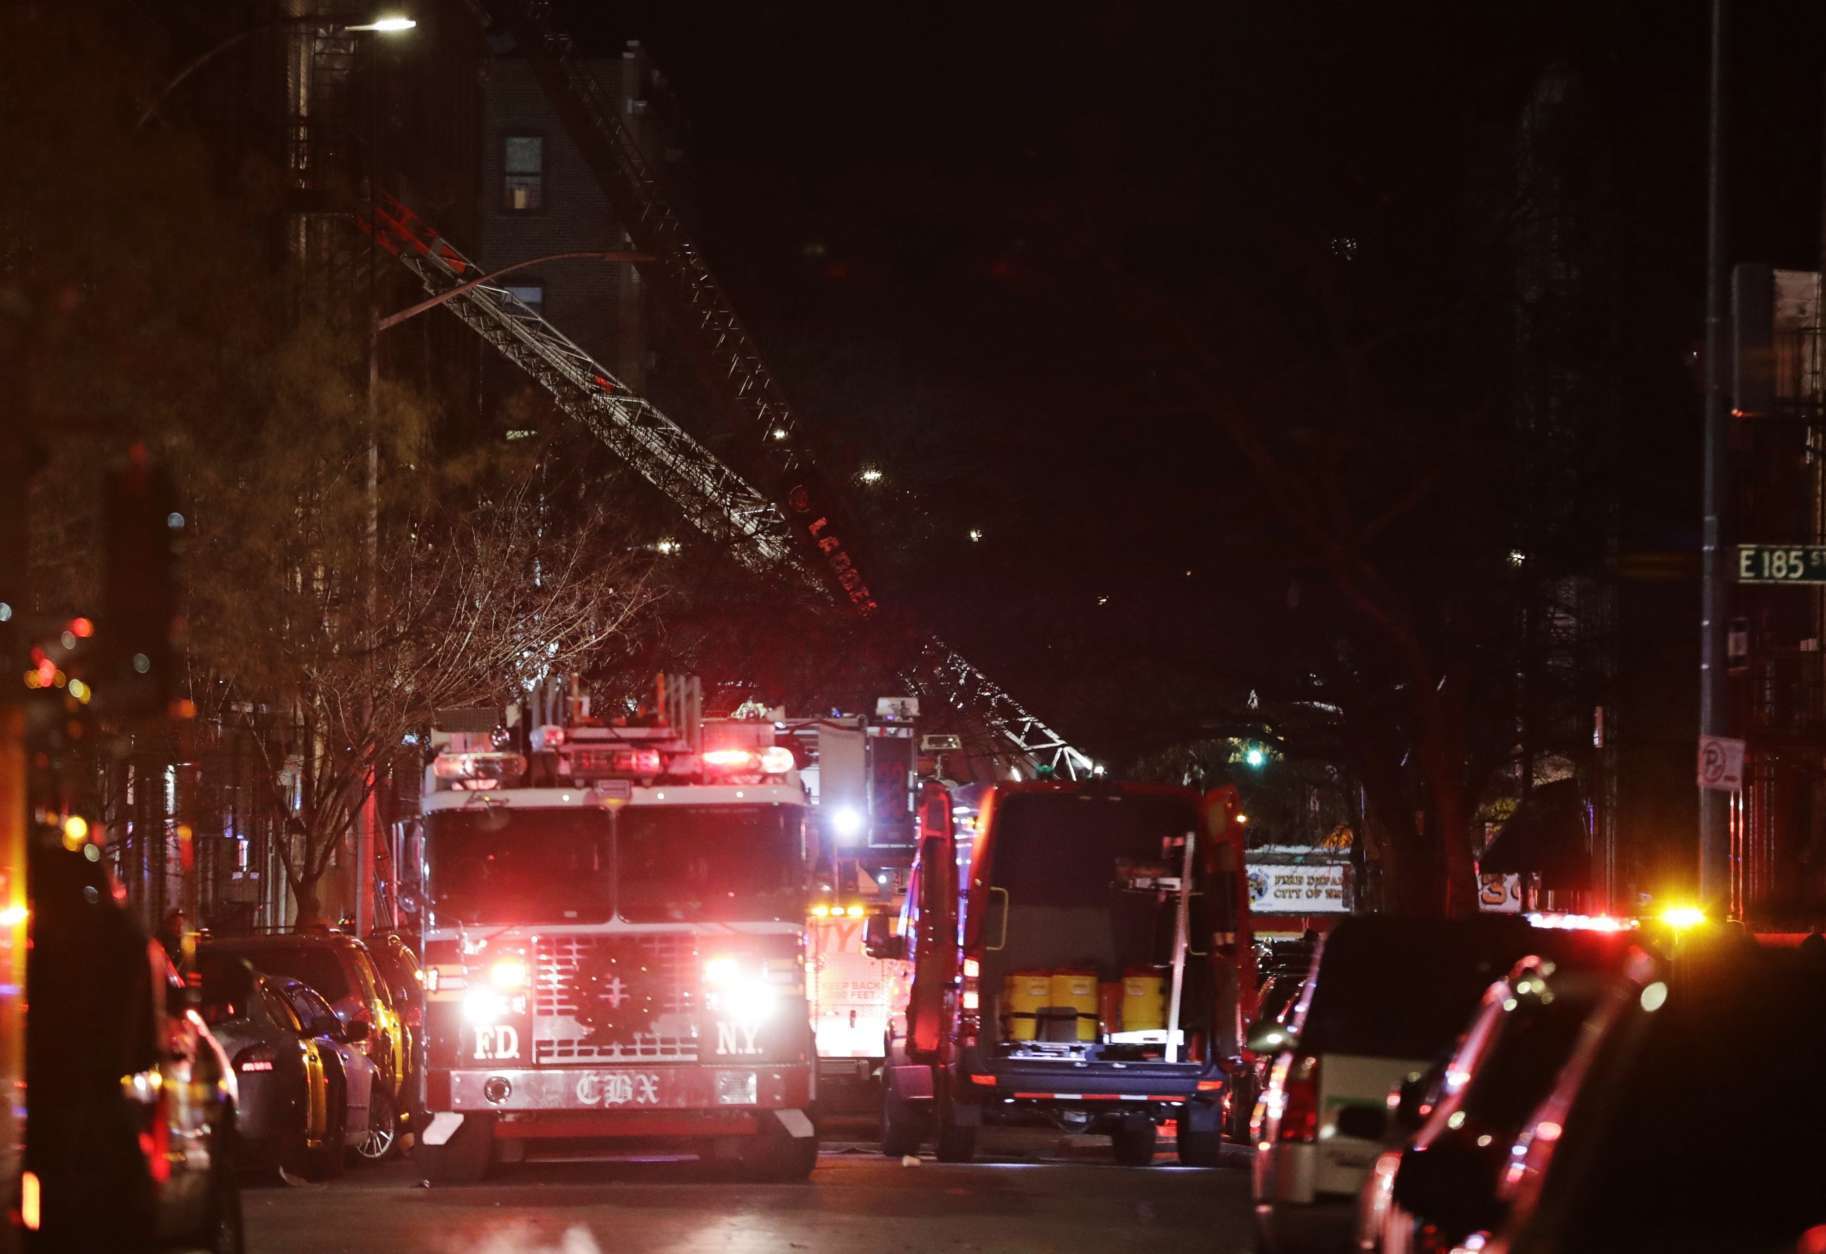 Firefighters respond to a deadly fire Thursday, Dec. 28, 2017, in the Bronx borough of New York. (AP Photo/Frank Franklin II)